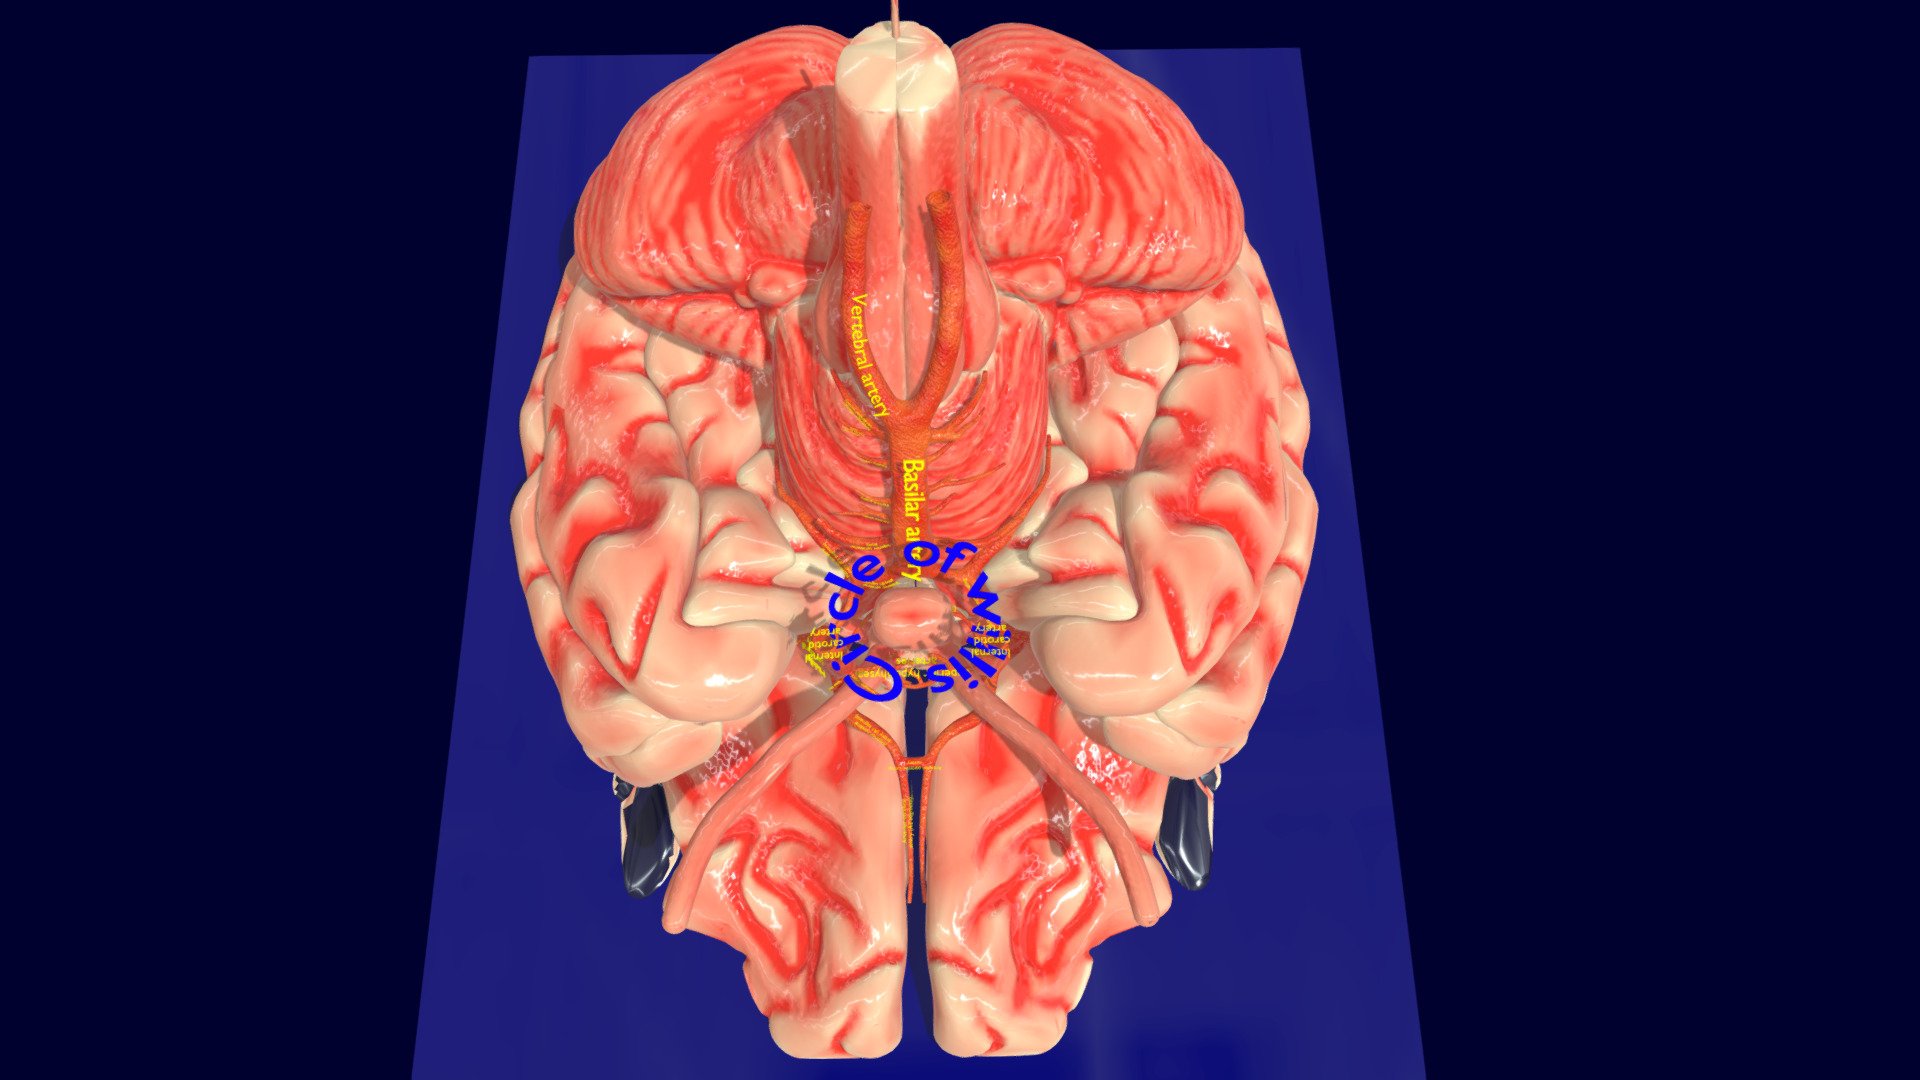 https://youtu.be/5EdbwgEyPqM    https://youtu.be/SW11RwiaVX8
A blend model depicting the circle of willis, a common site for aneurysm to occur in brain and causing subarachnoid haemorrhage.  The material has both  image textures with non-overlapping UVs.
The formats fbx,obj with applied uv mapped textures have also been included in the downloads along with stl &amp; 3mf 3d model